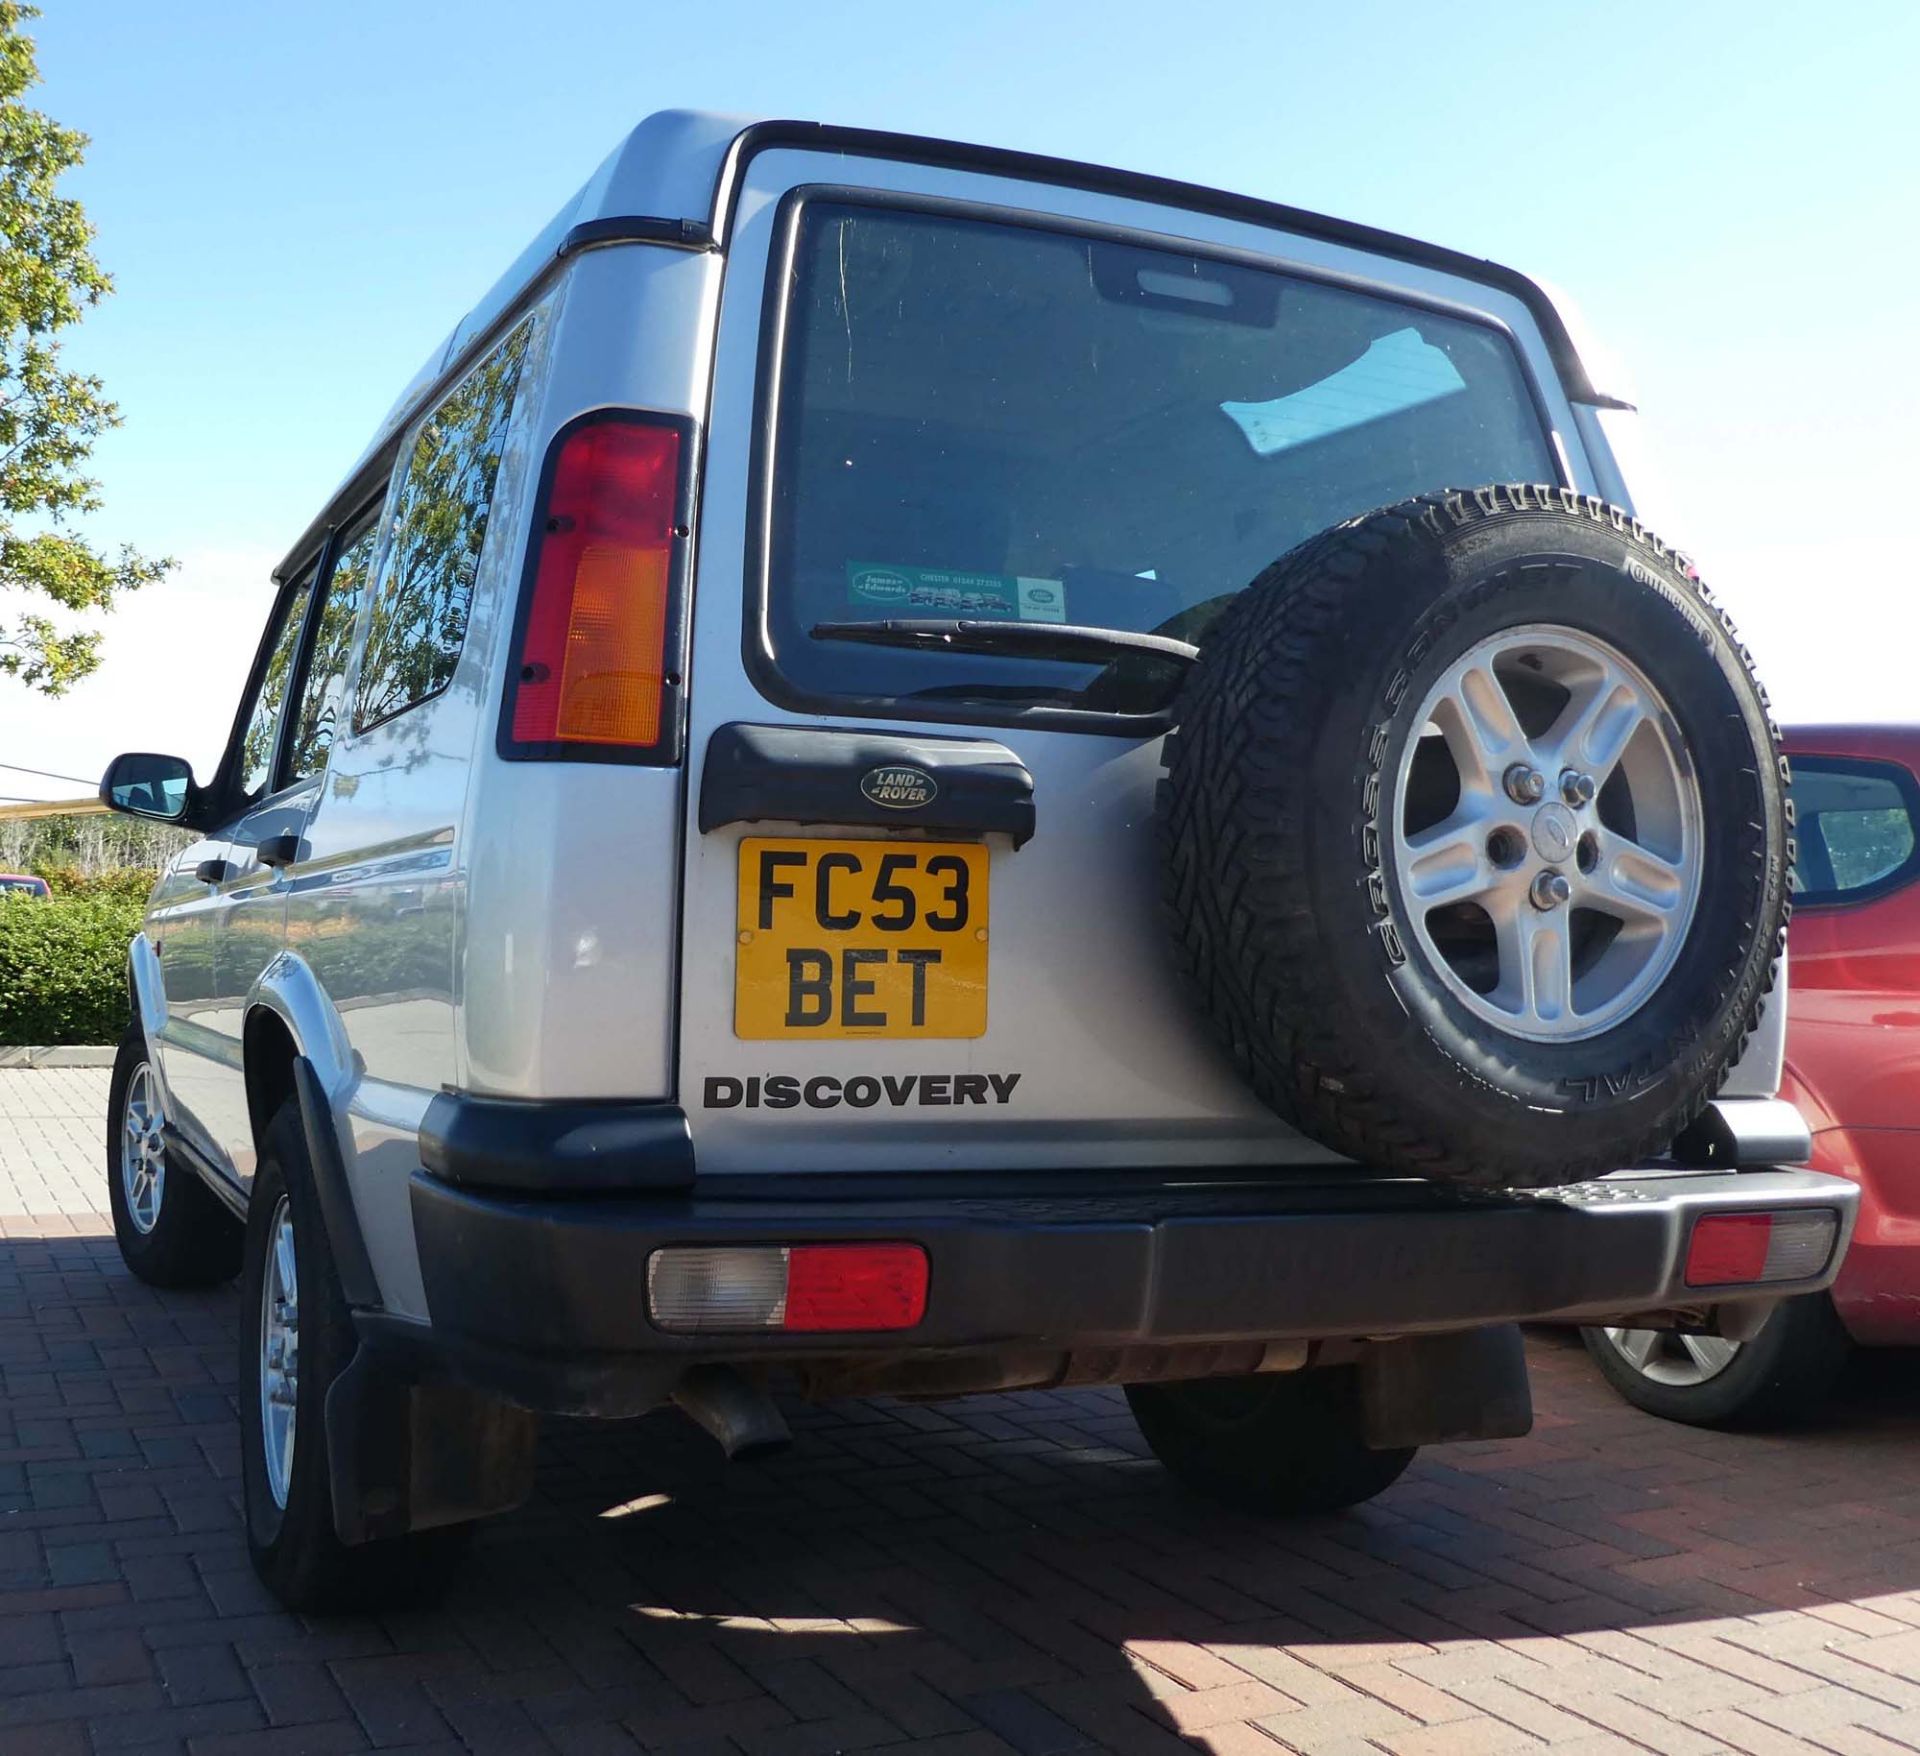 FC53 BET Land Rover Discovery TD5 S in silver, 2495cc, first registered 08.09.2003, diesel, approx - Image 8 of 10